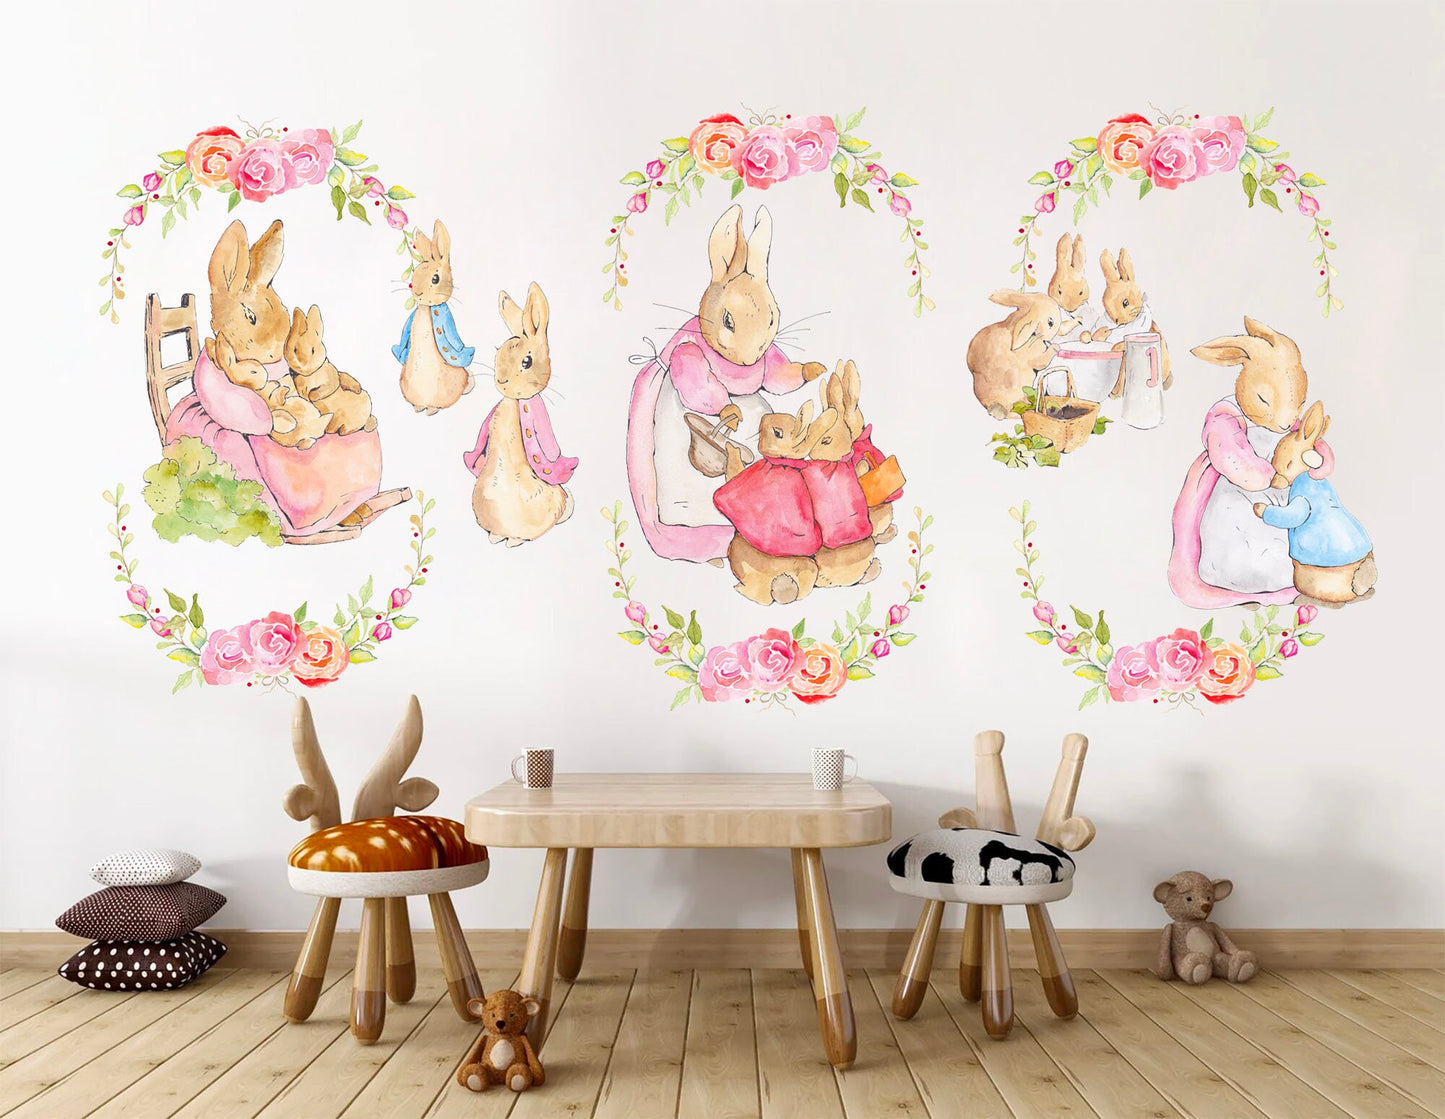 Peter Rabbit Family: Cartoon Wall Decal in a Floral Wonderland - BR421